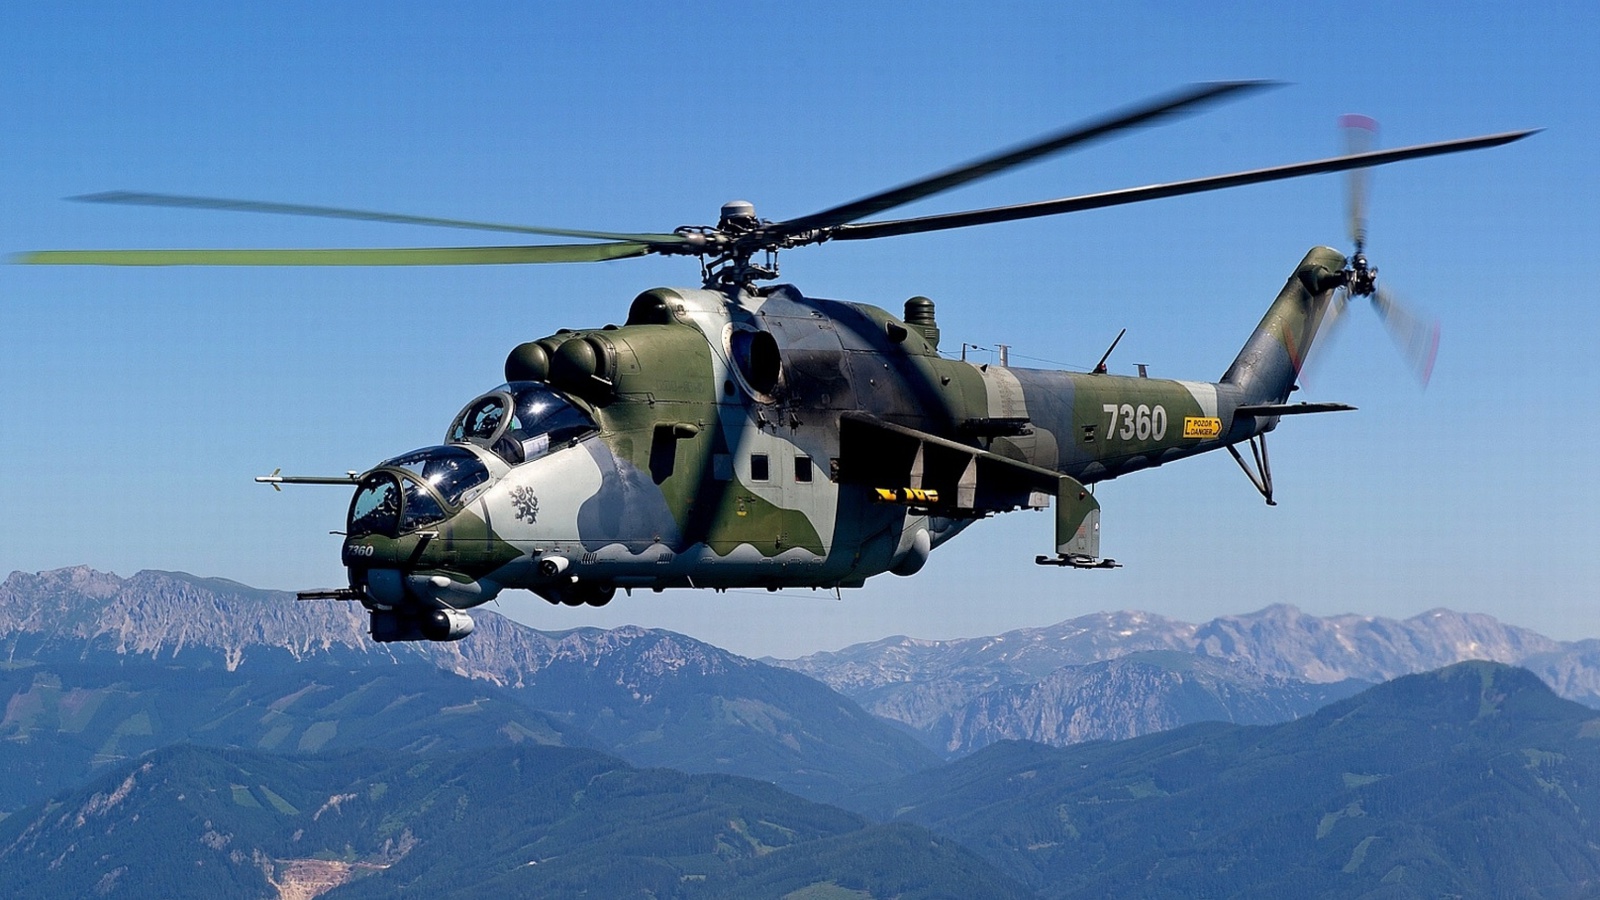 Mil Mi 24 Hind Attack Helicopter wallpaper 1600x900